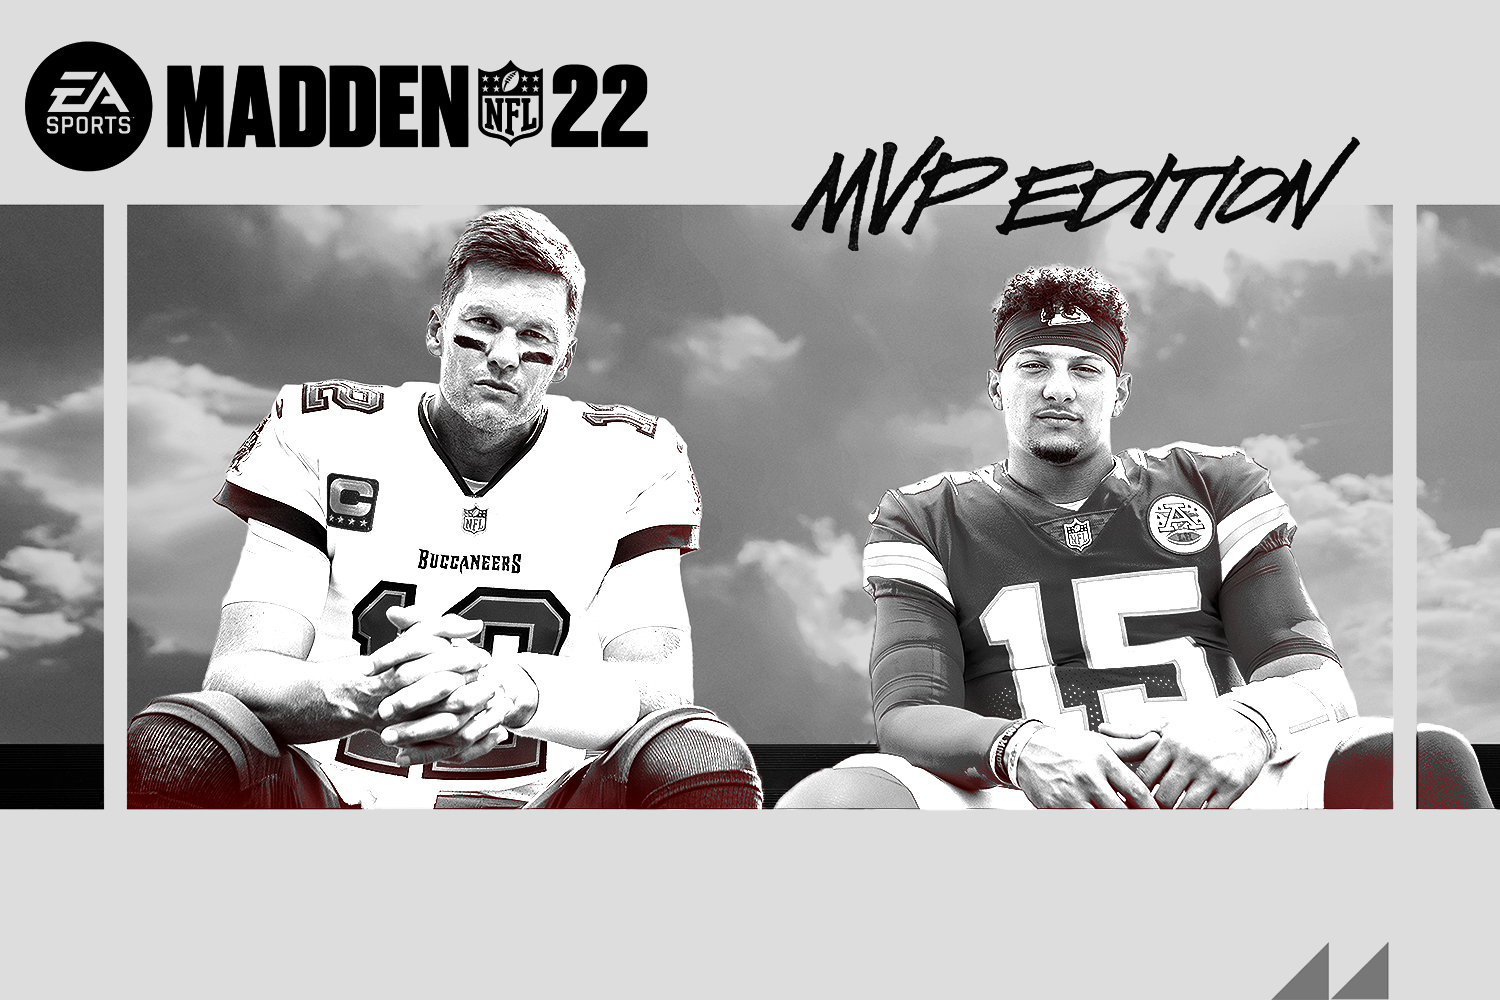 Super Bowl Rivals Come Together on 'Madden 22' Cover